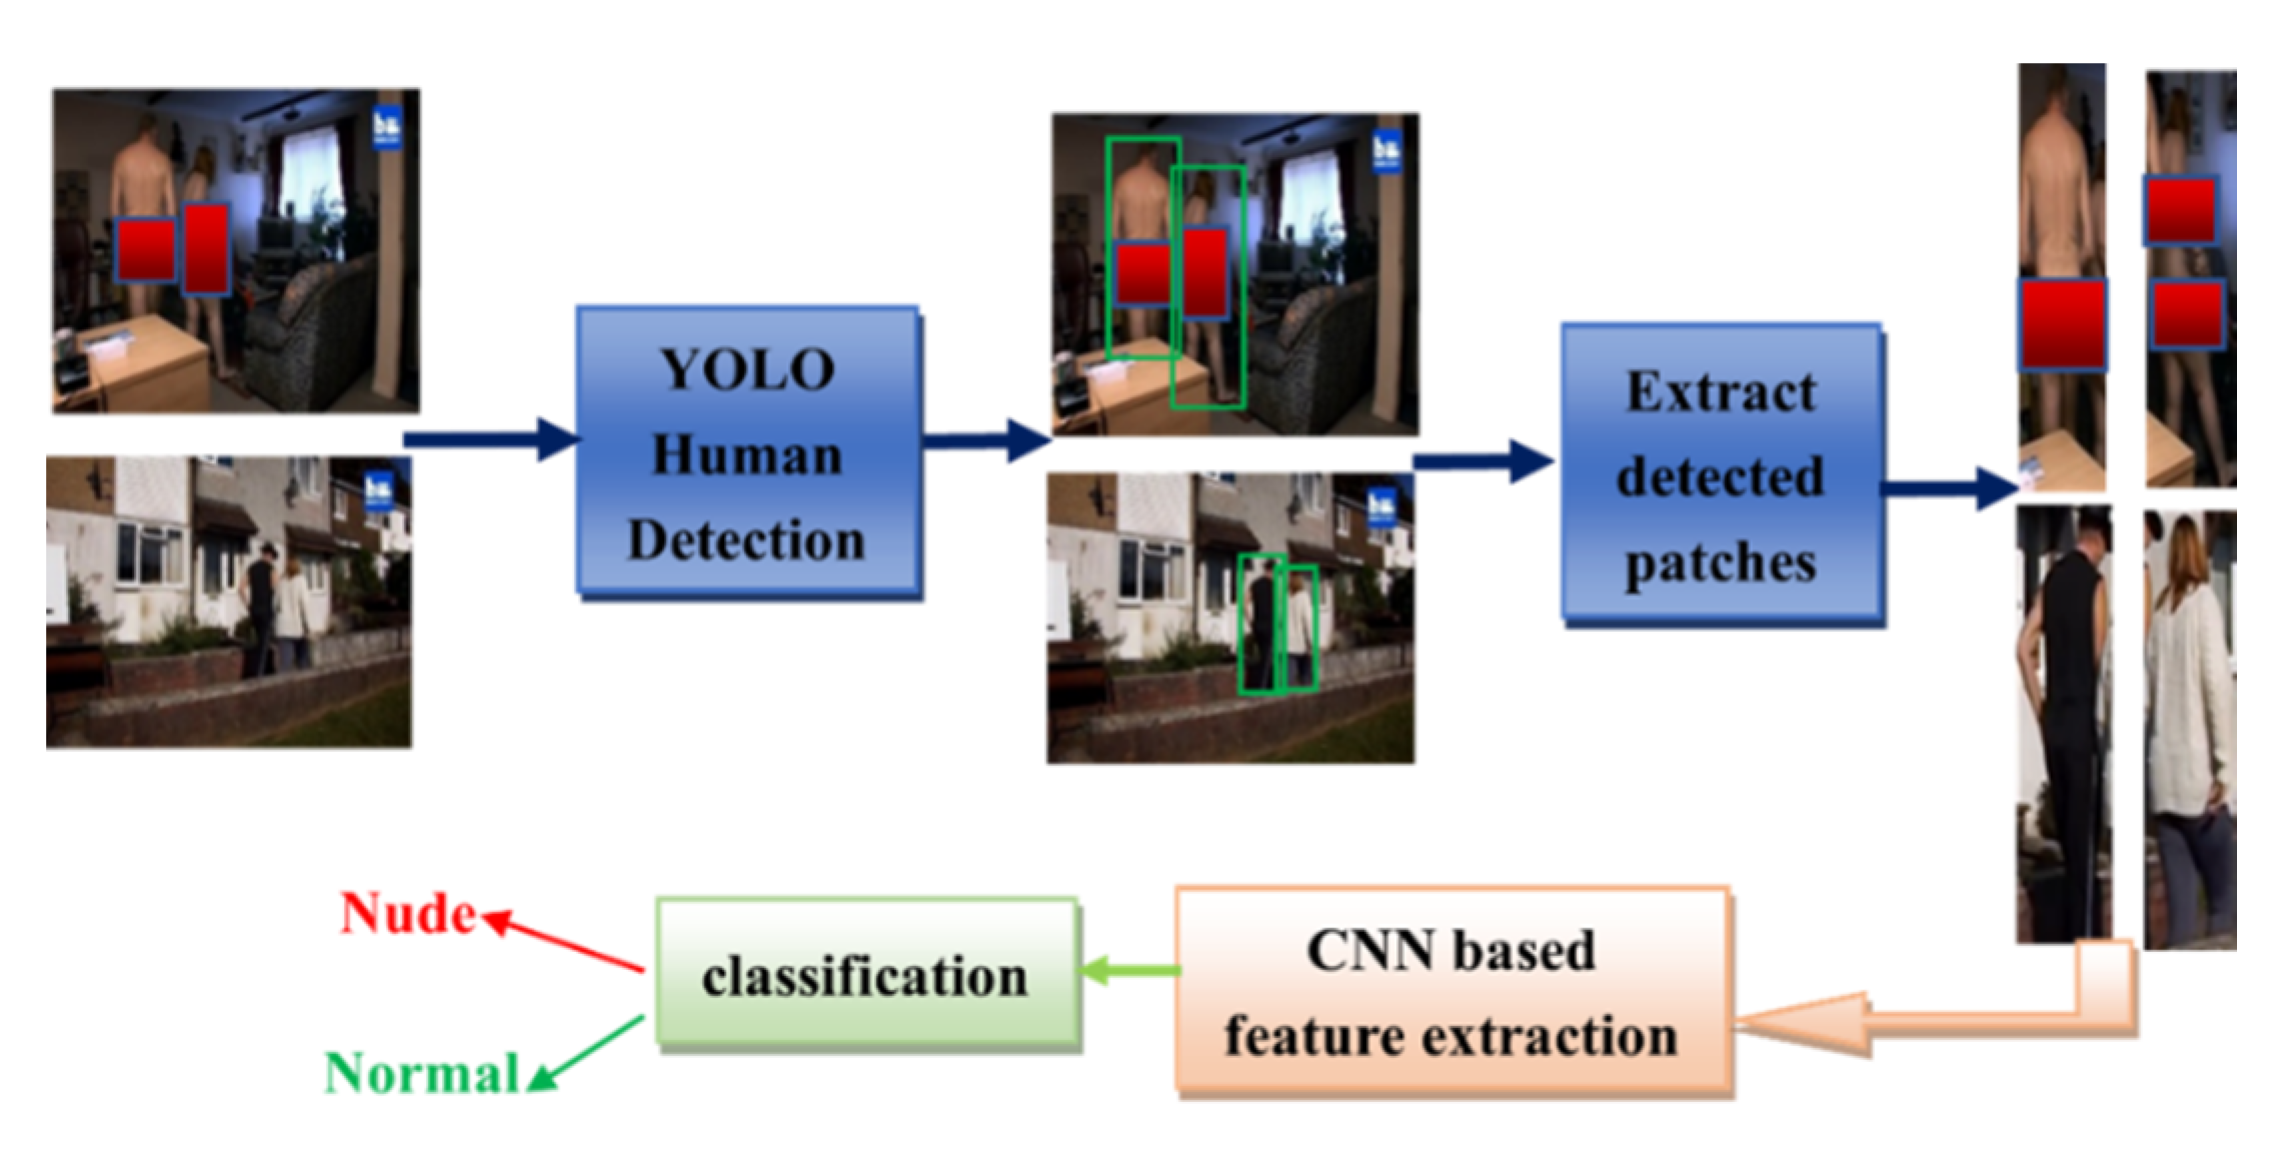 Symmetry | Free Full-Text | Transfer Detection of YOLO to Focus CNN's  Attention on Nude Regions for Adult Content Detection